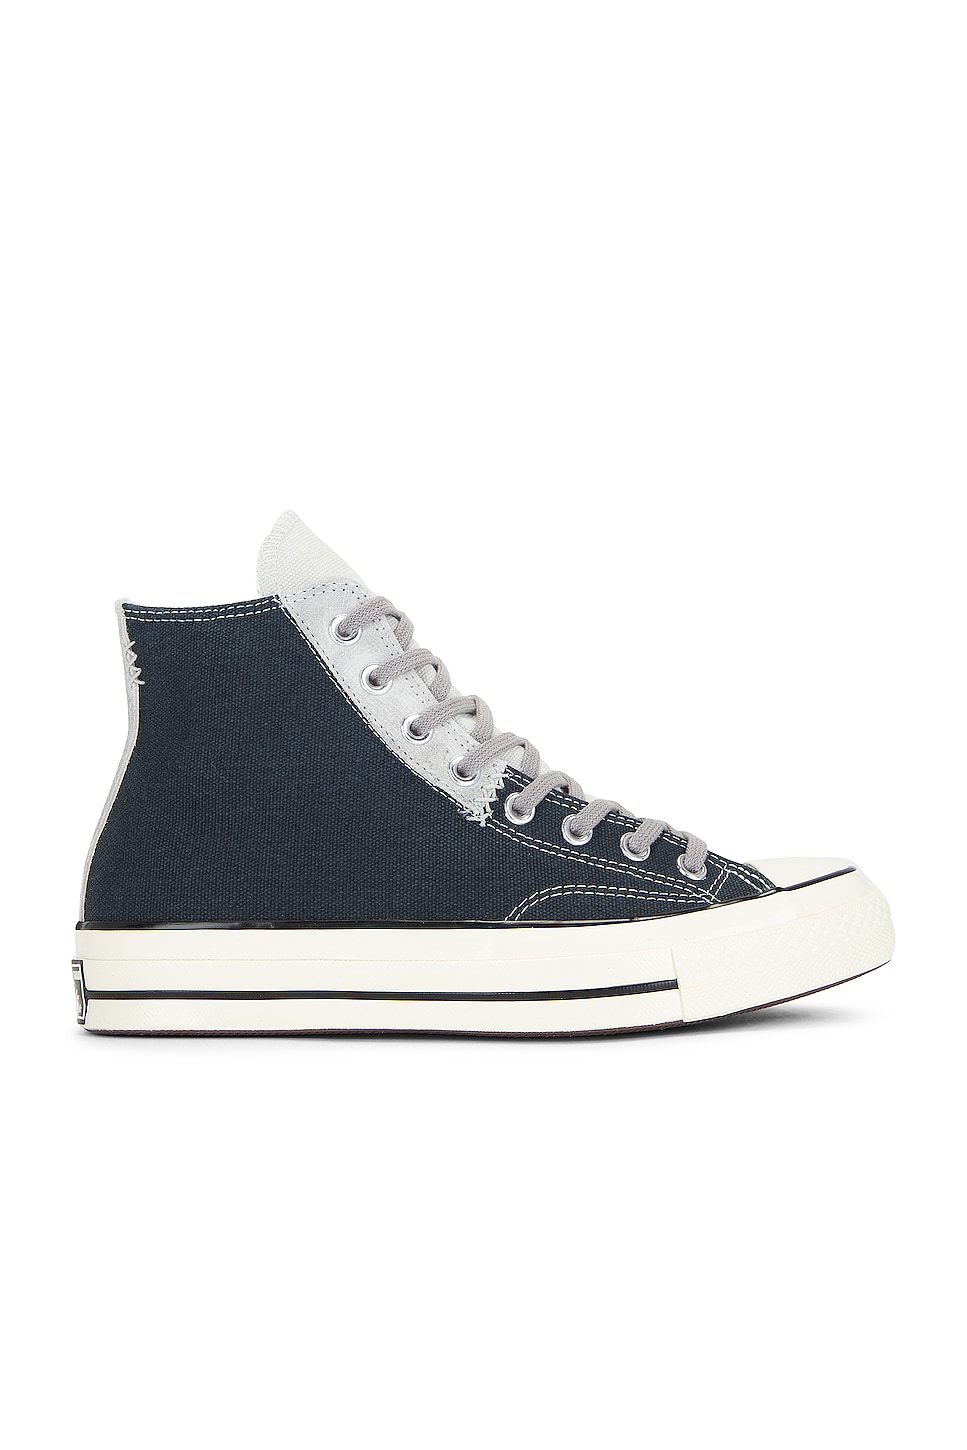 Image 1 of Converse Chuck 70 Mixed Materials in Black, Fossilized, & Totally Neutral